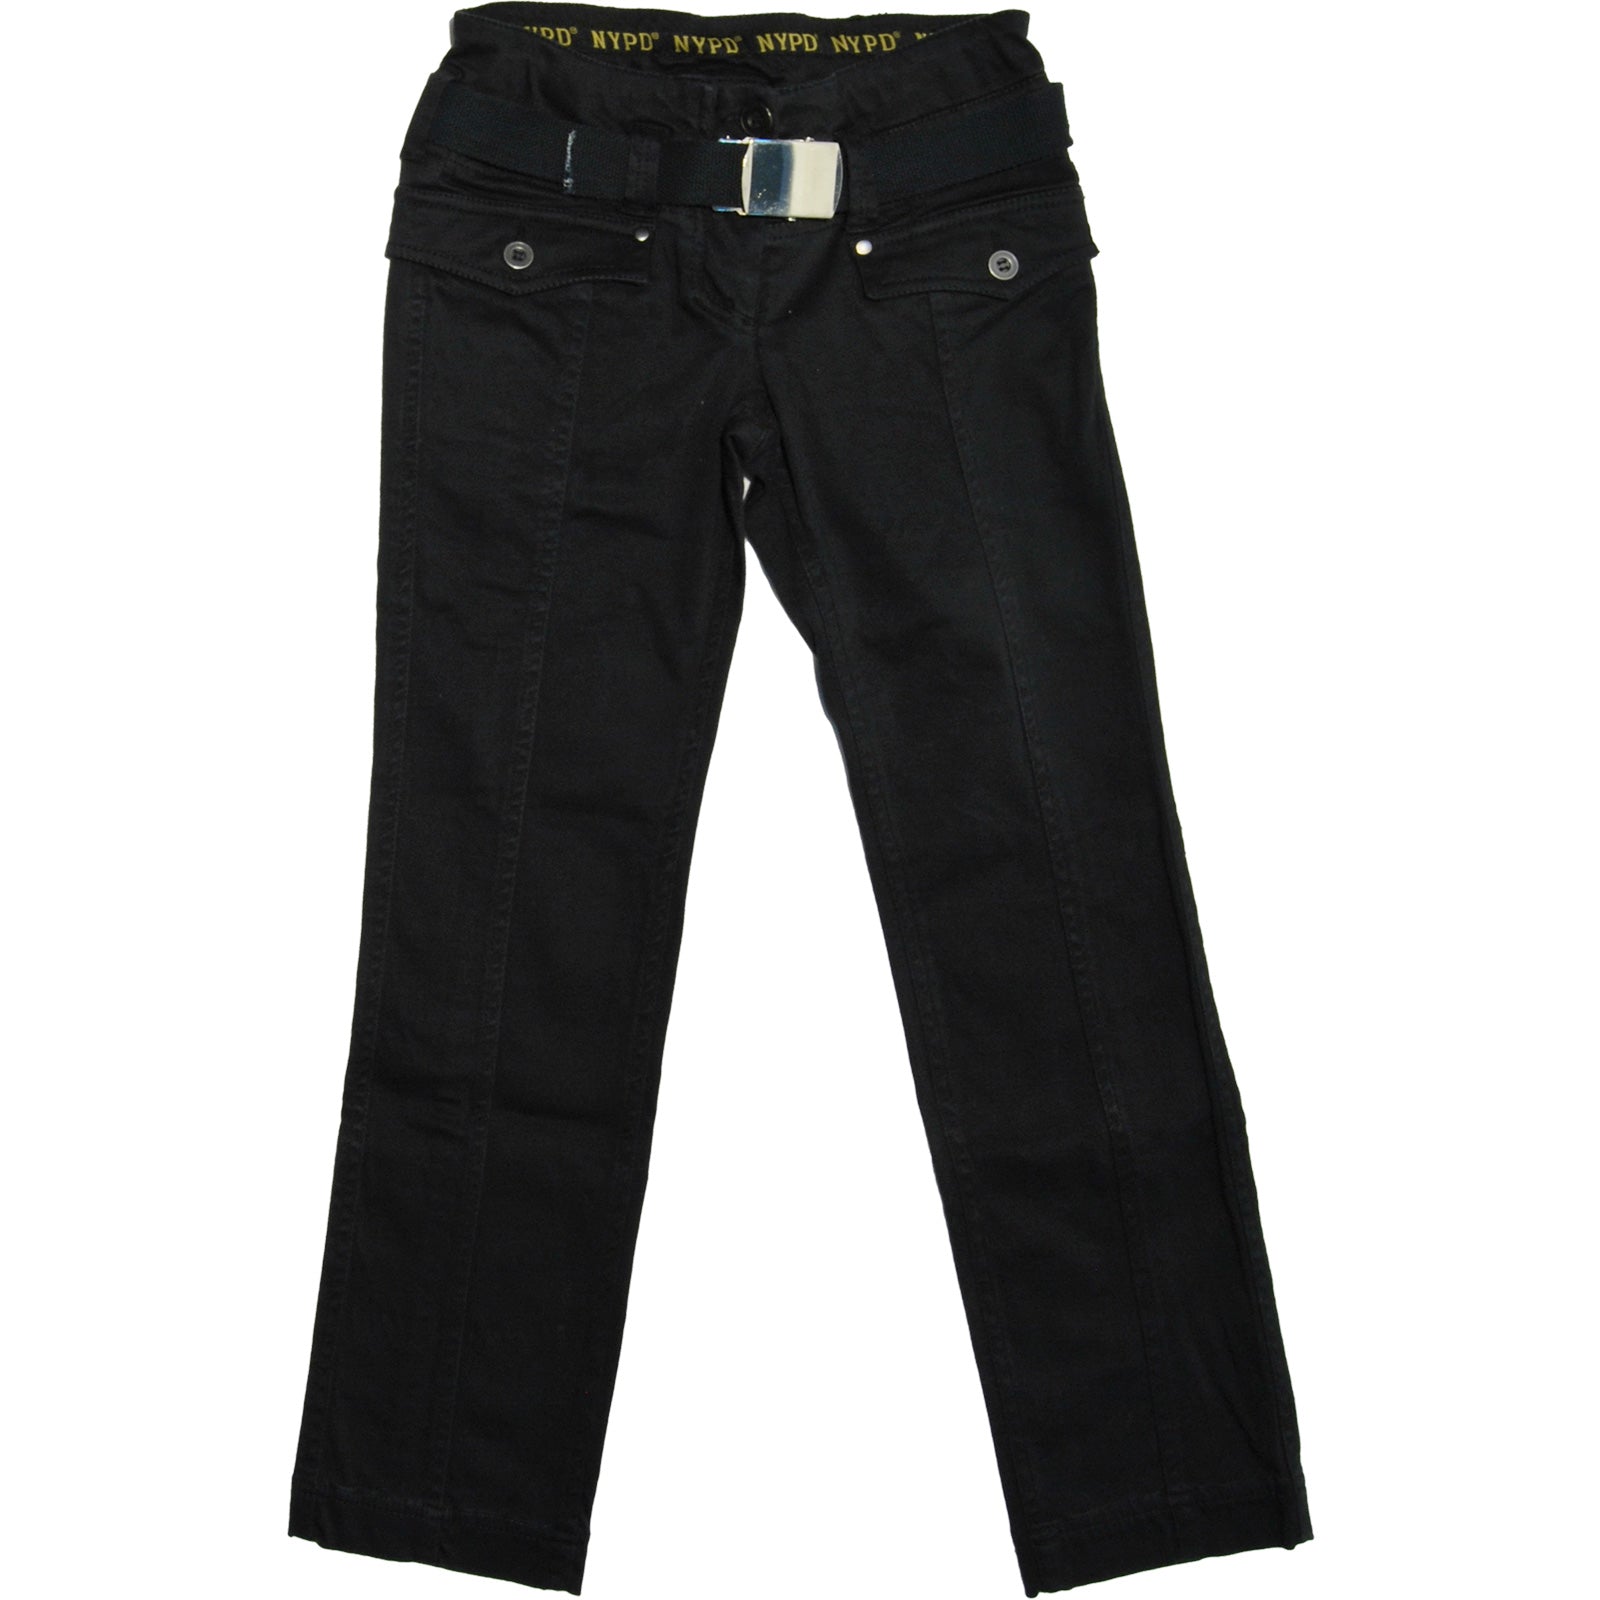 
  Moleskin pants from the children's clothing line Mirtillo with side pockets, narrow fit.adjust...